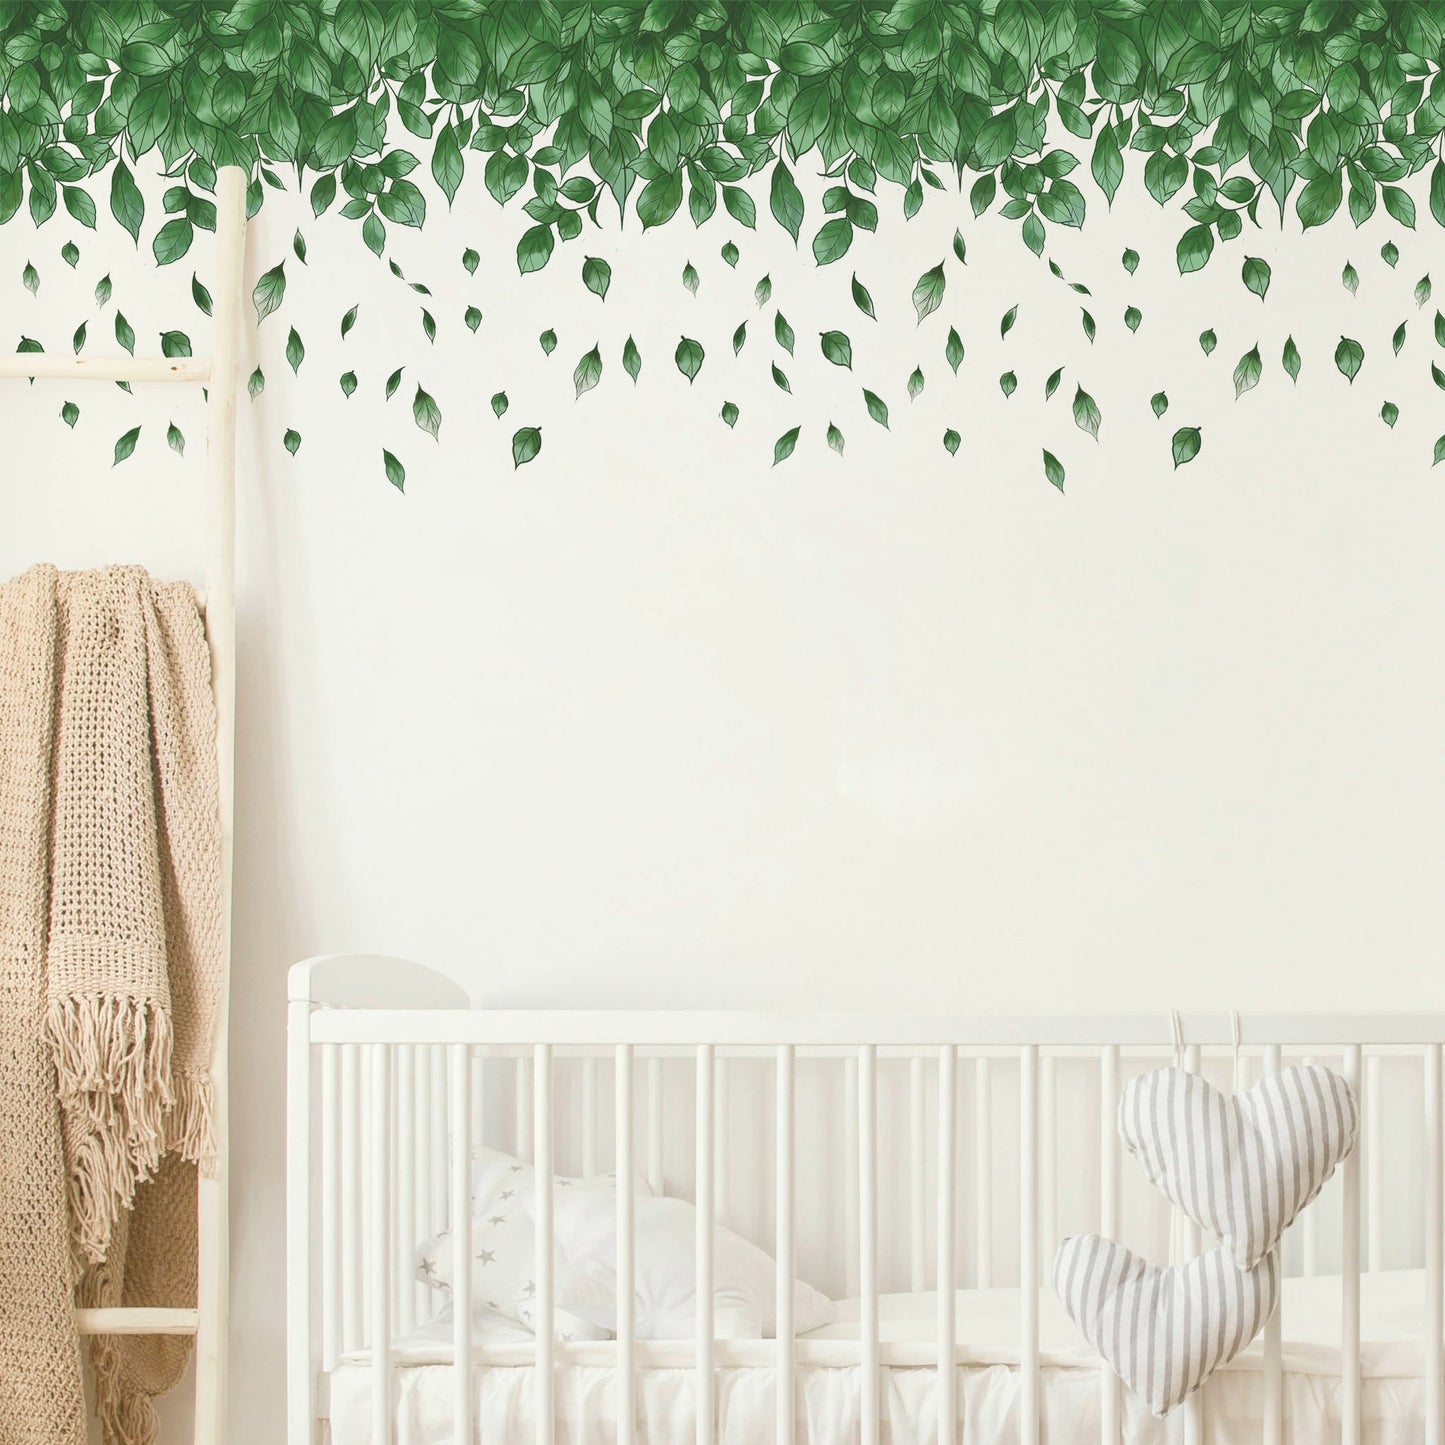 Floating Tree Branch Leaves Wall Decal - Removable Peel and Stick - BR105